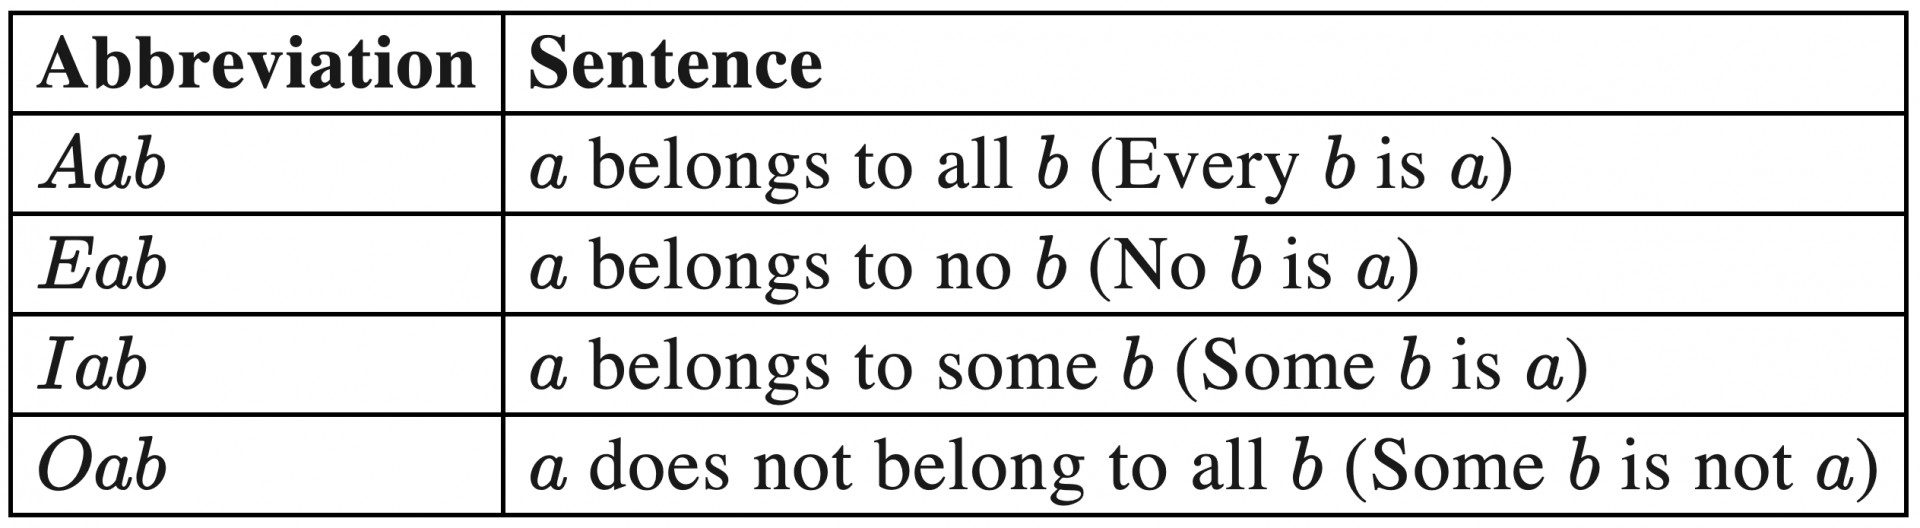 A table of predicates with four conditions: Aab, Eab, Iab, Oab.